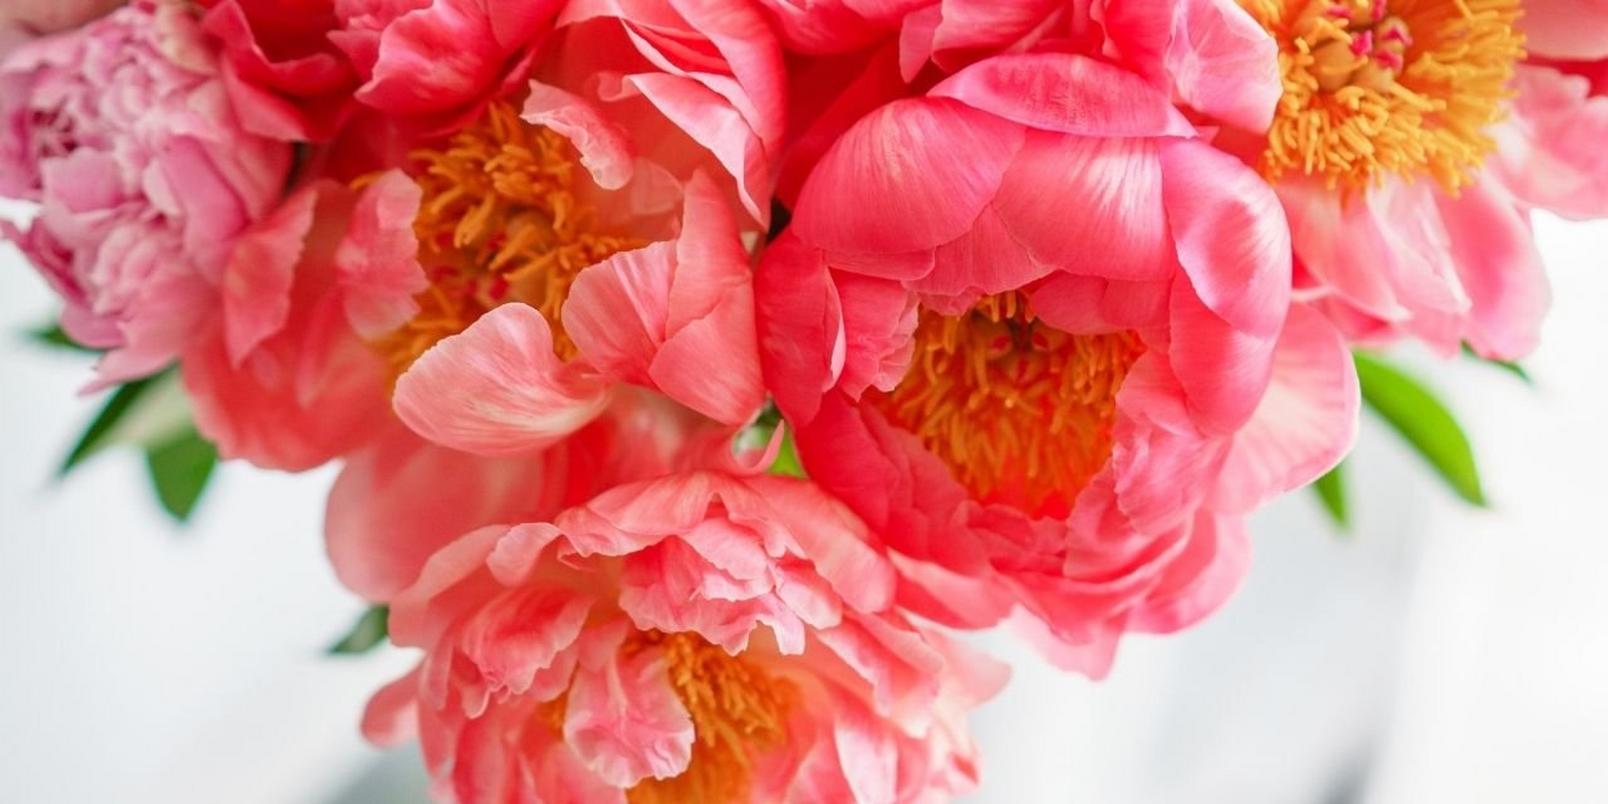 peonies-facts-that-may-surprise-you-6